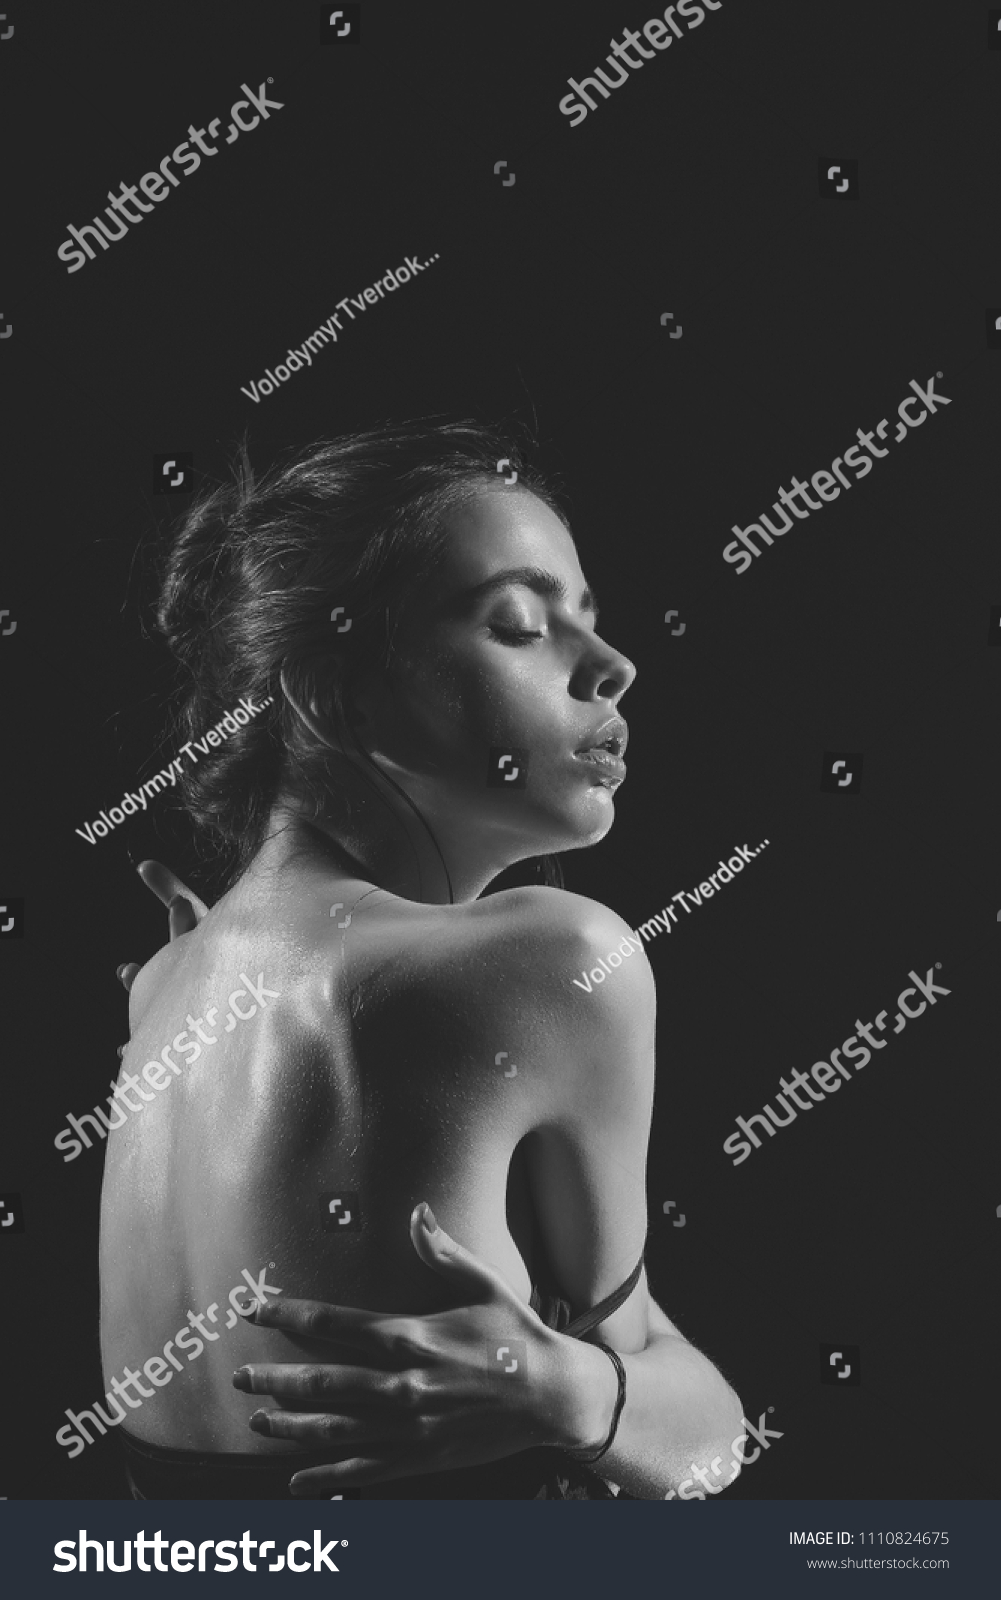 fashion portrait. Girl with oily or wet skin on black background. Woman with sensual face and bare back. Beauty, fashion, look. Skincare, moisture, wellness. Purity, perfection, sensuality concept. #1110824675